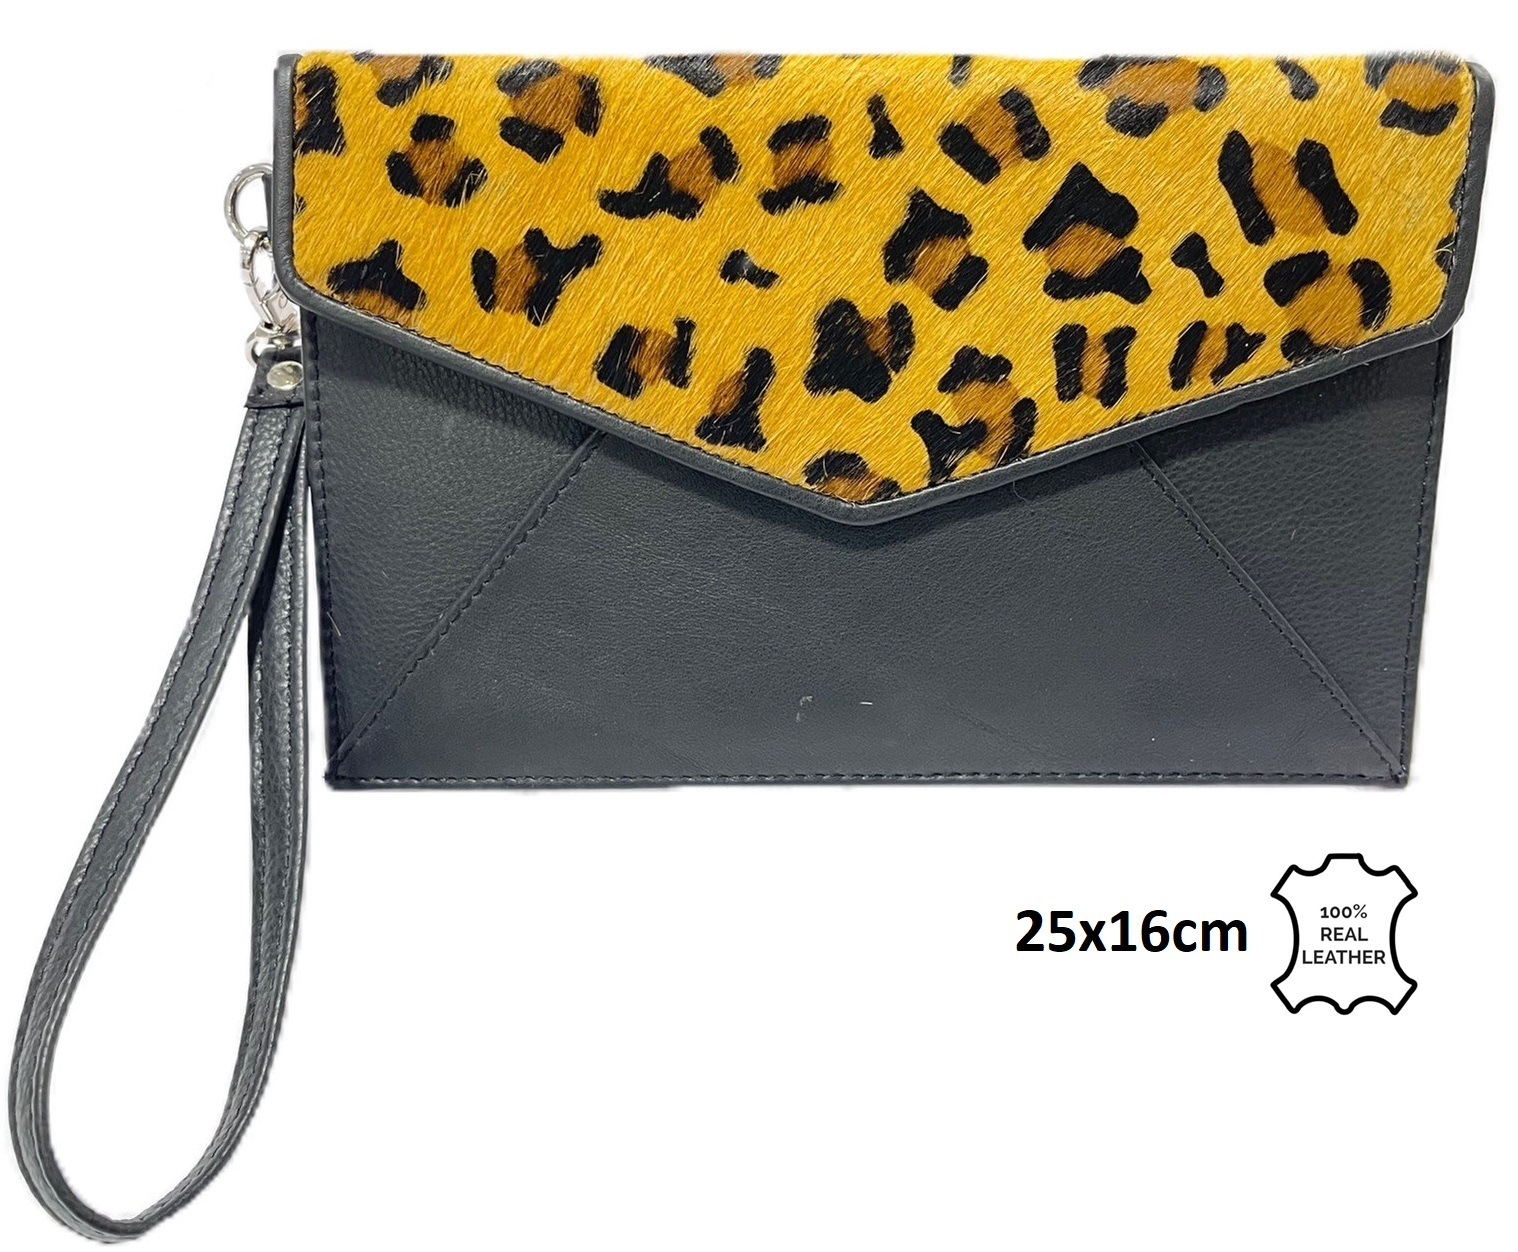 T-H3.2 AFB-3049 Leather Cowhide Clutch Leopard 25x16cm